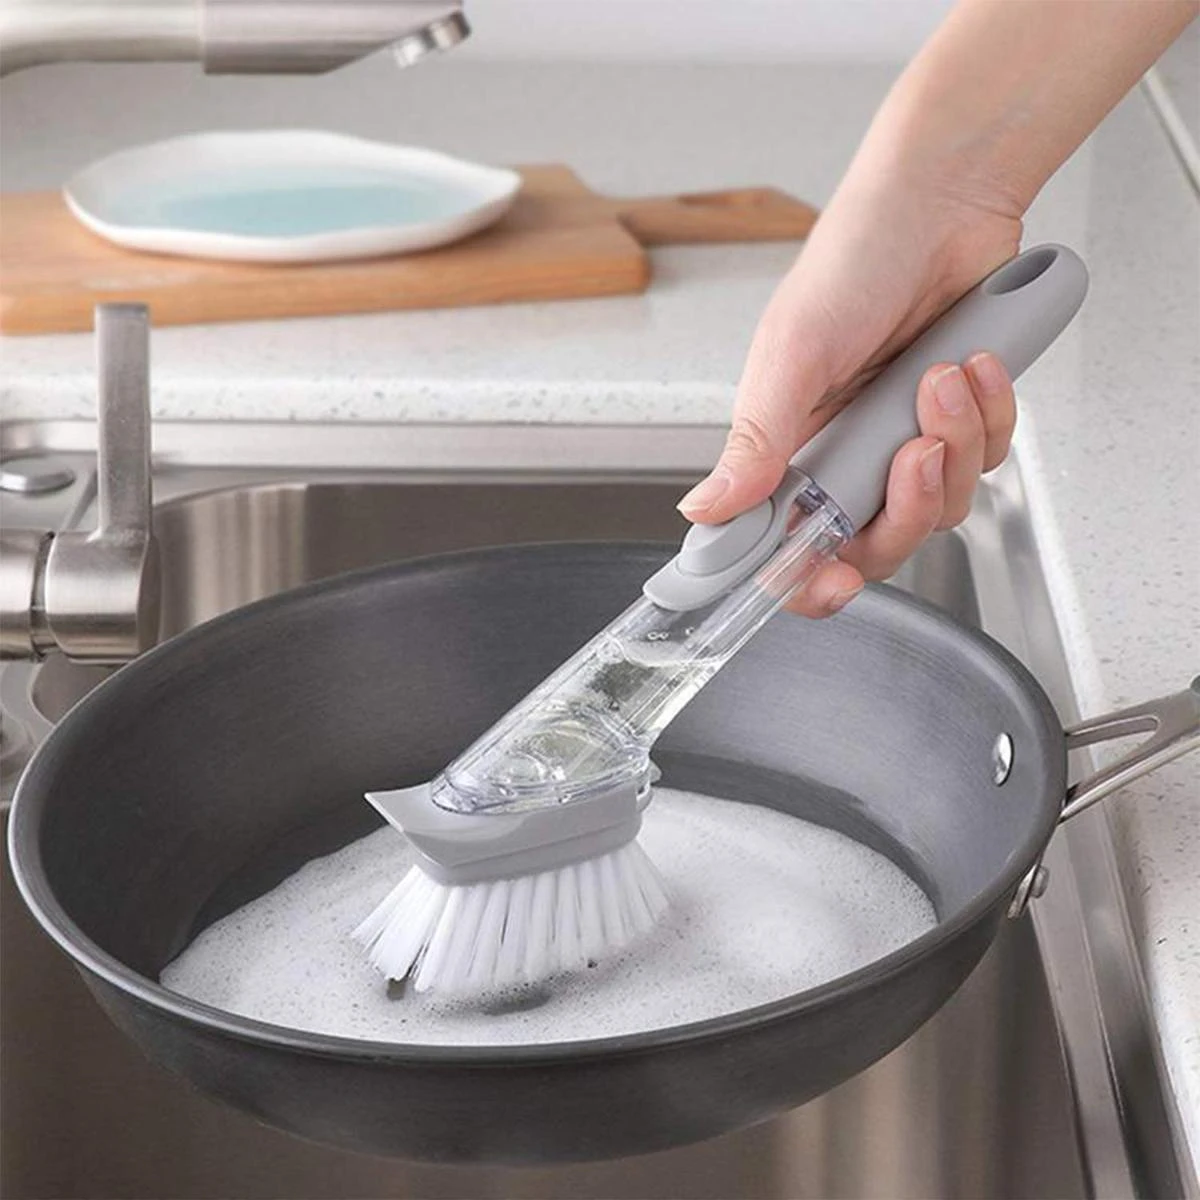 Kitchen Cleaning Brush Scrubber Dish Bowl Washing Sponge with Refill Liquid Soap Dispenser Automatic Soap Dish Cleaning Brush